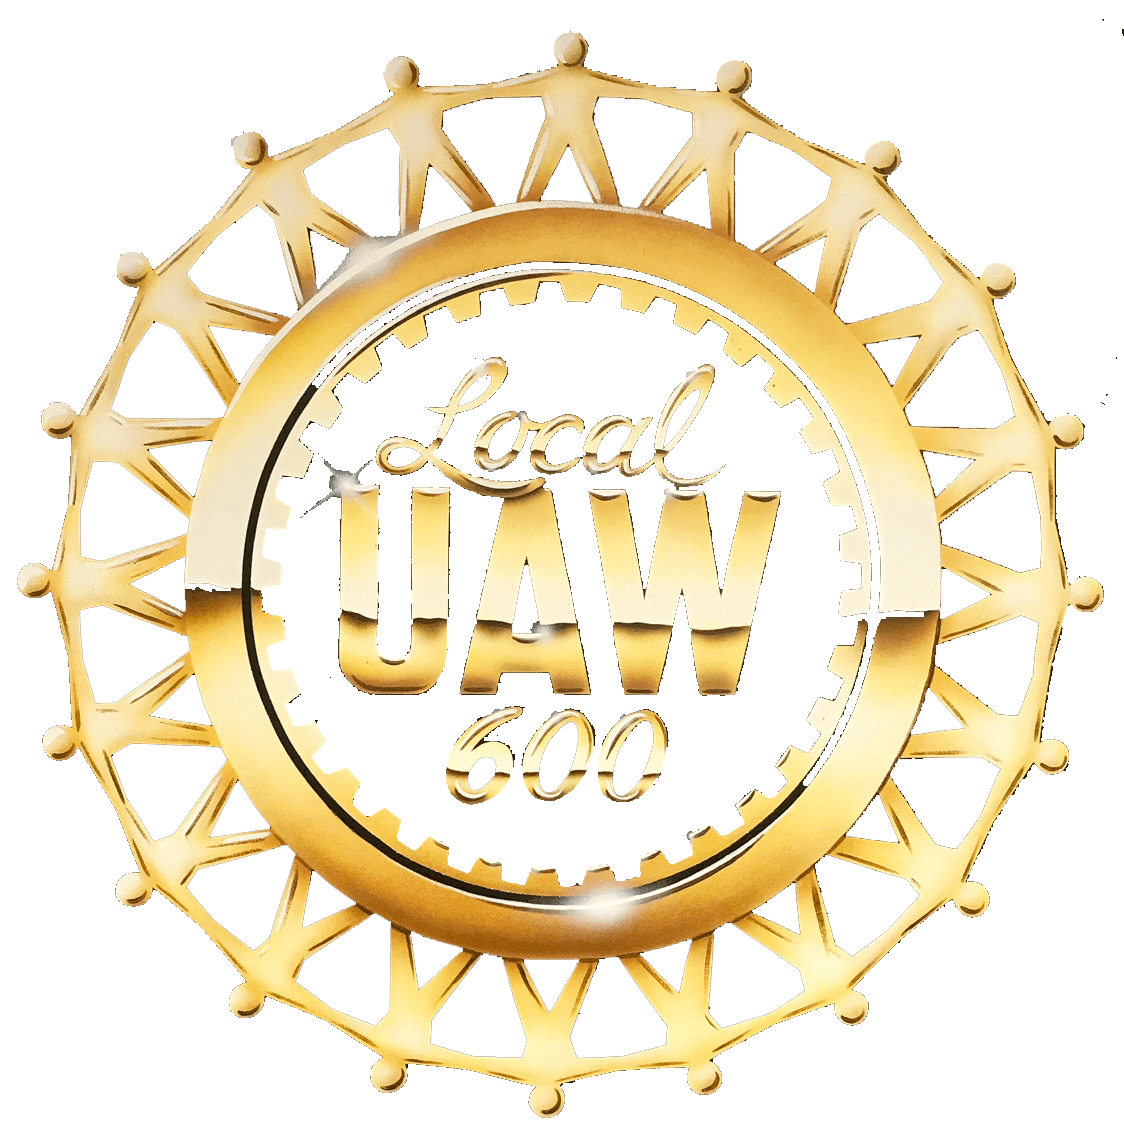 Yellow UAW Logo - Home Local 600 Website